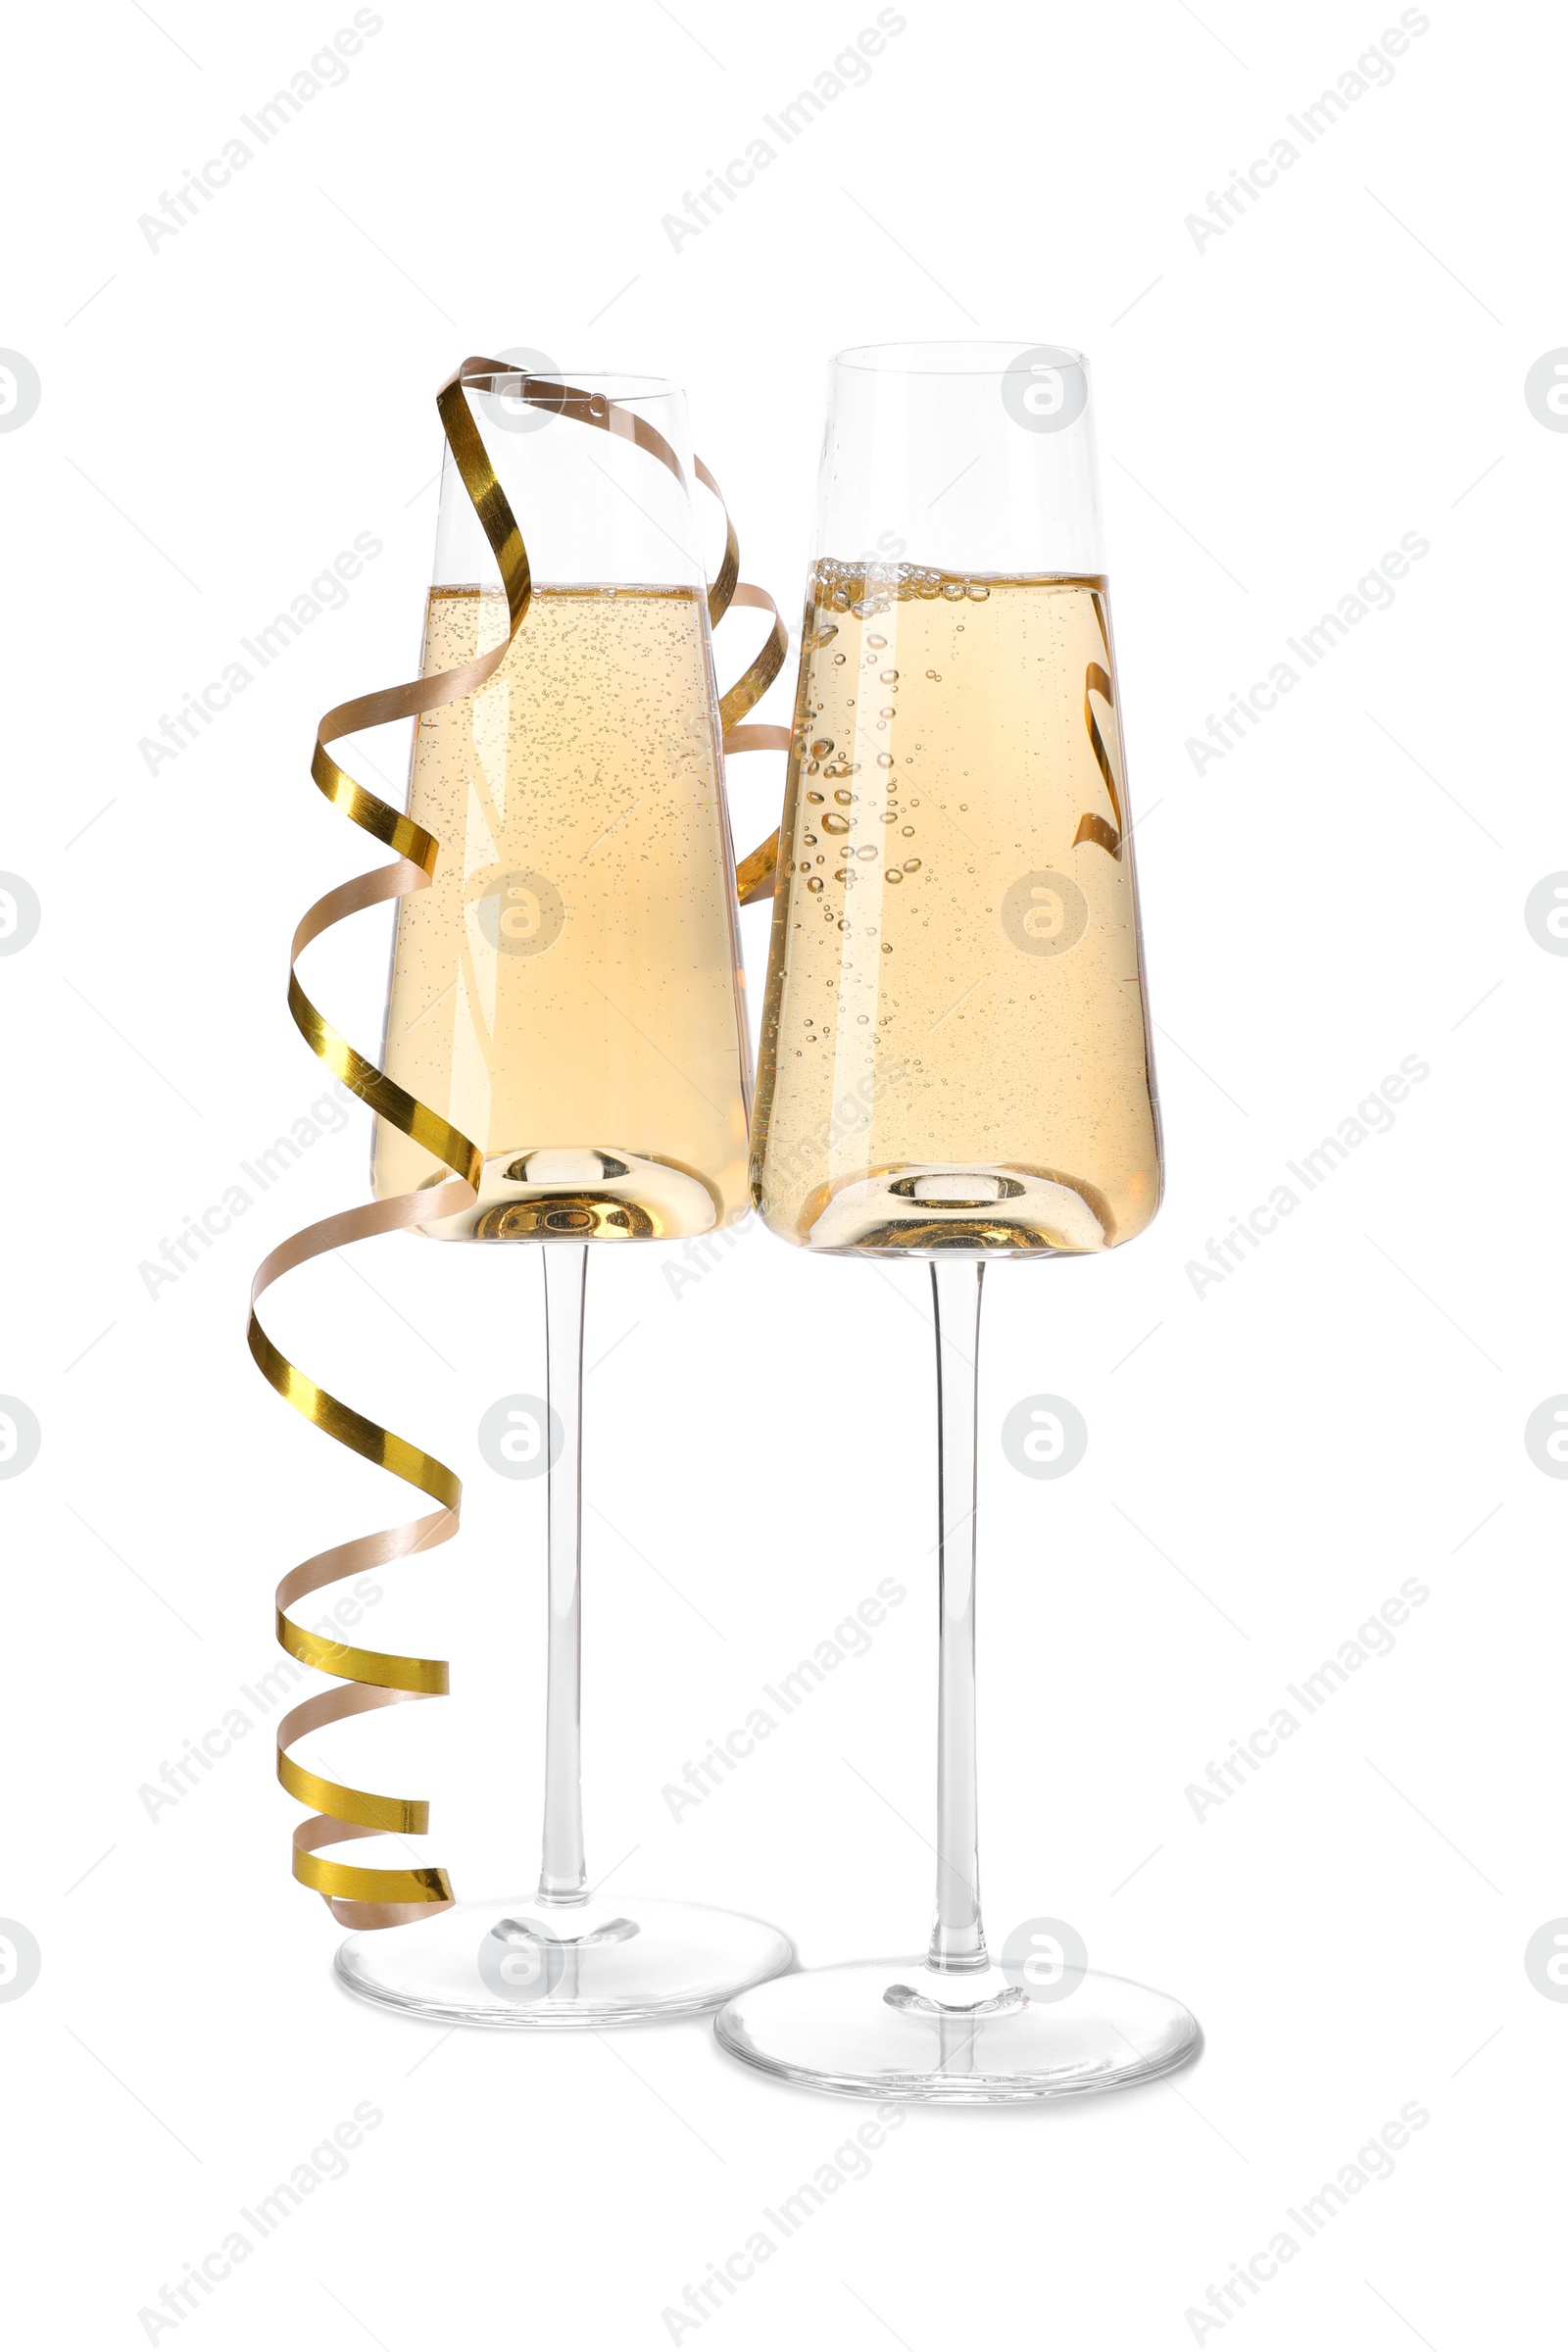 Photo of Glasses of champagne on white background. Festive drink